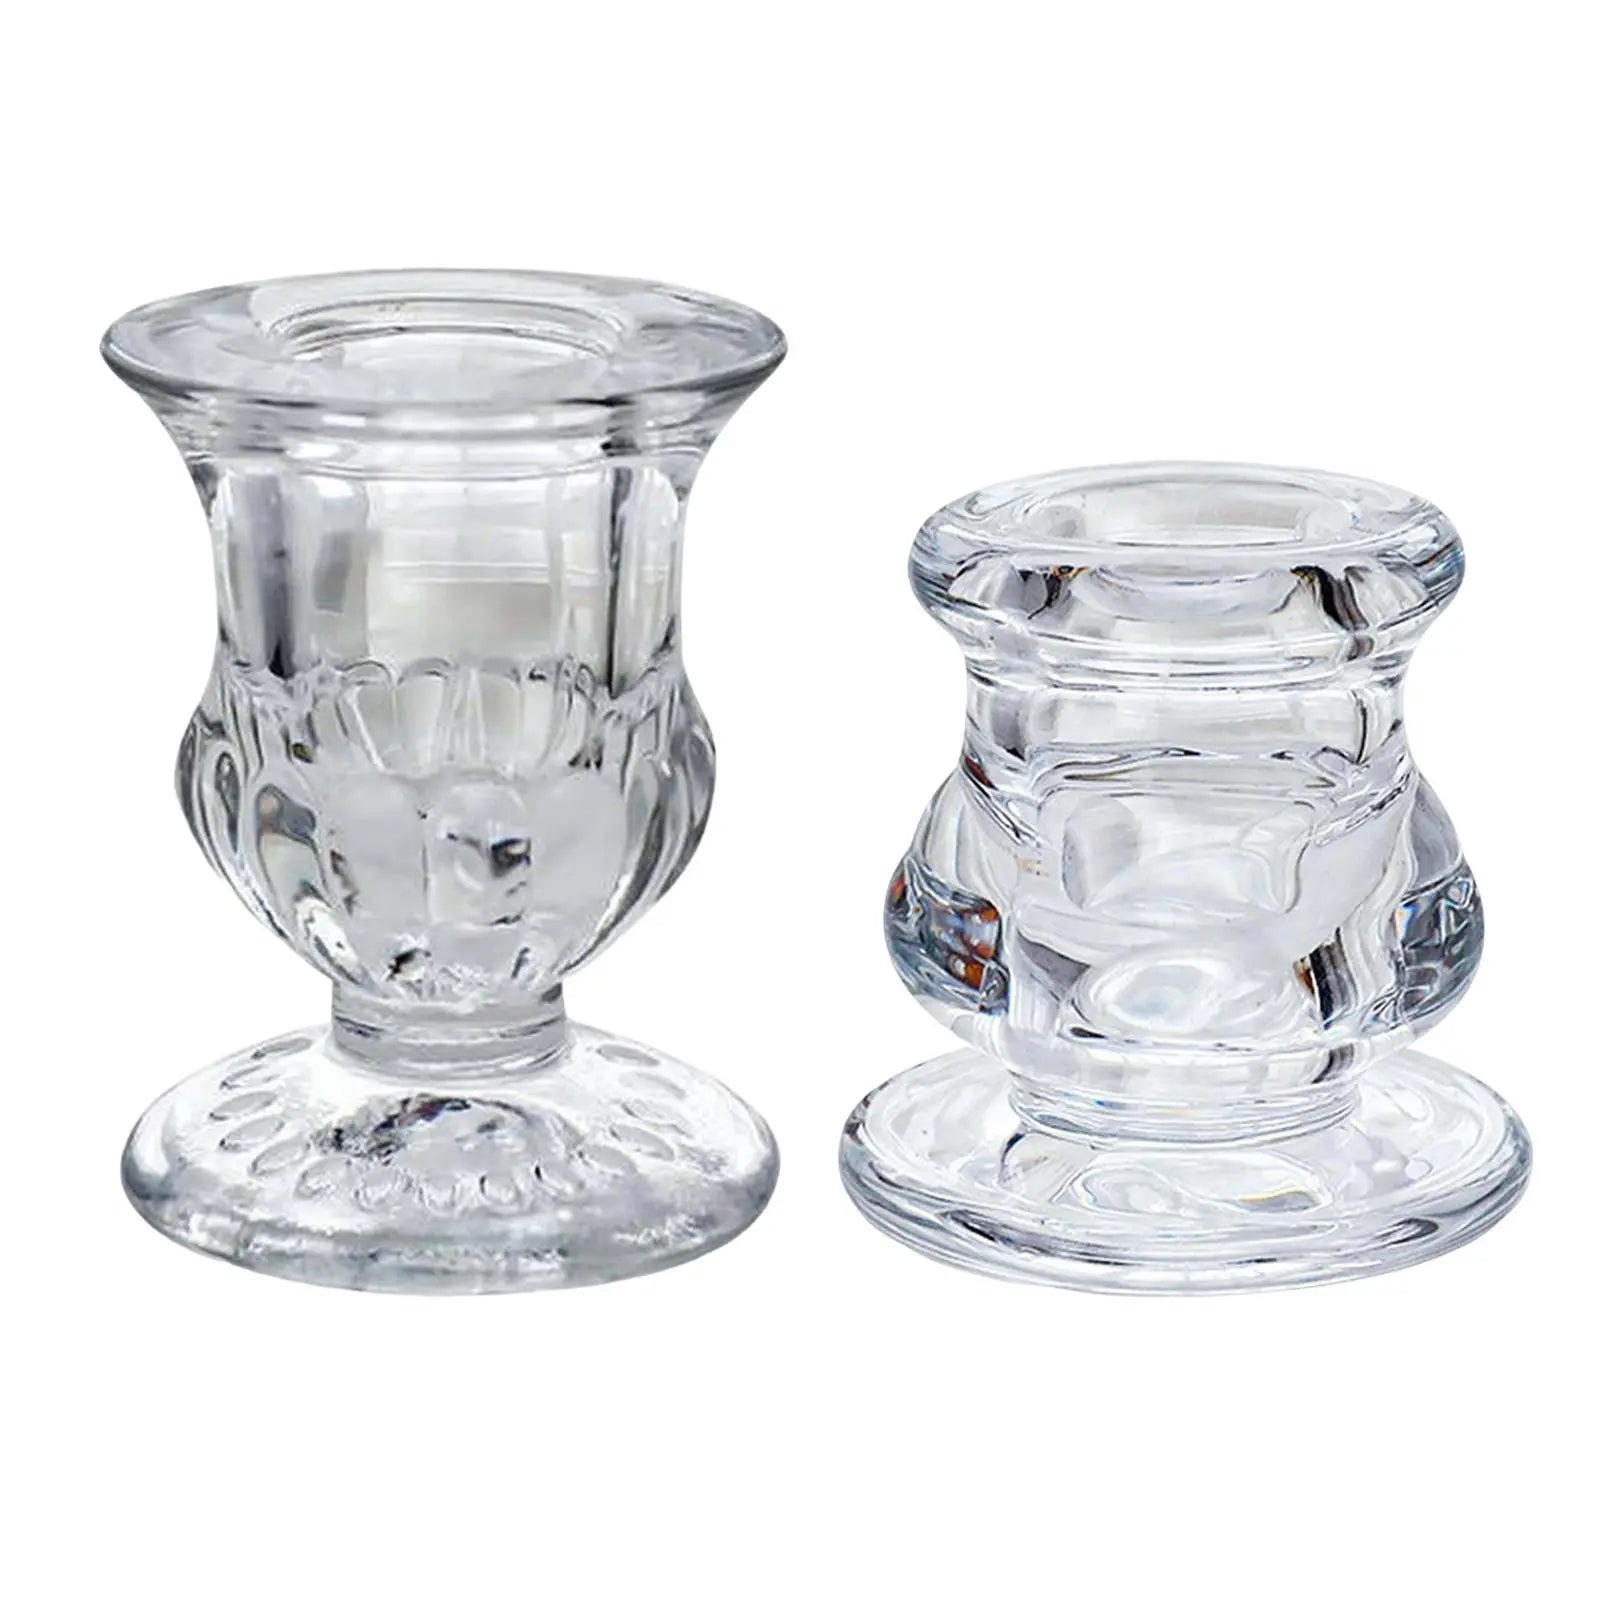 Candle Holder Wedding Dinner Centerpiece Tabletop Room Christmas Decoration Candle Holder European Style Small Glass Candlestick